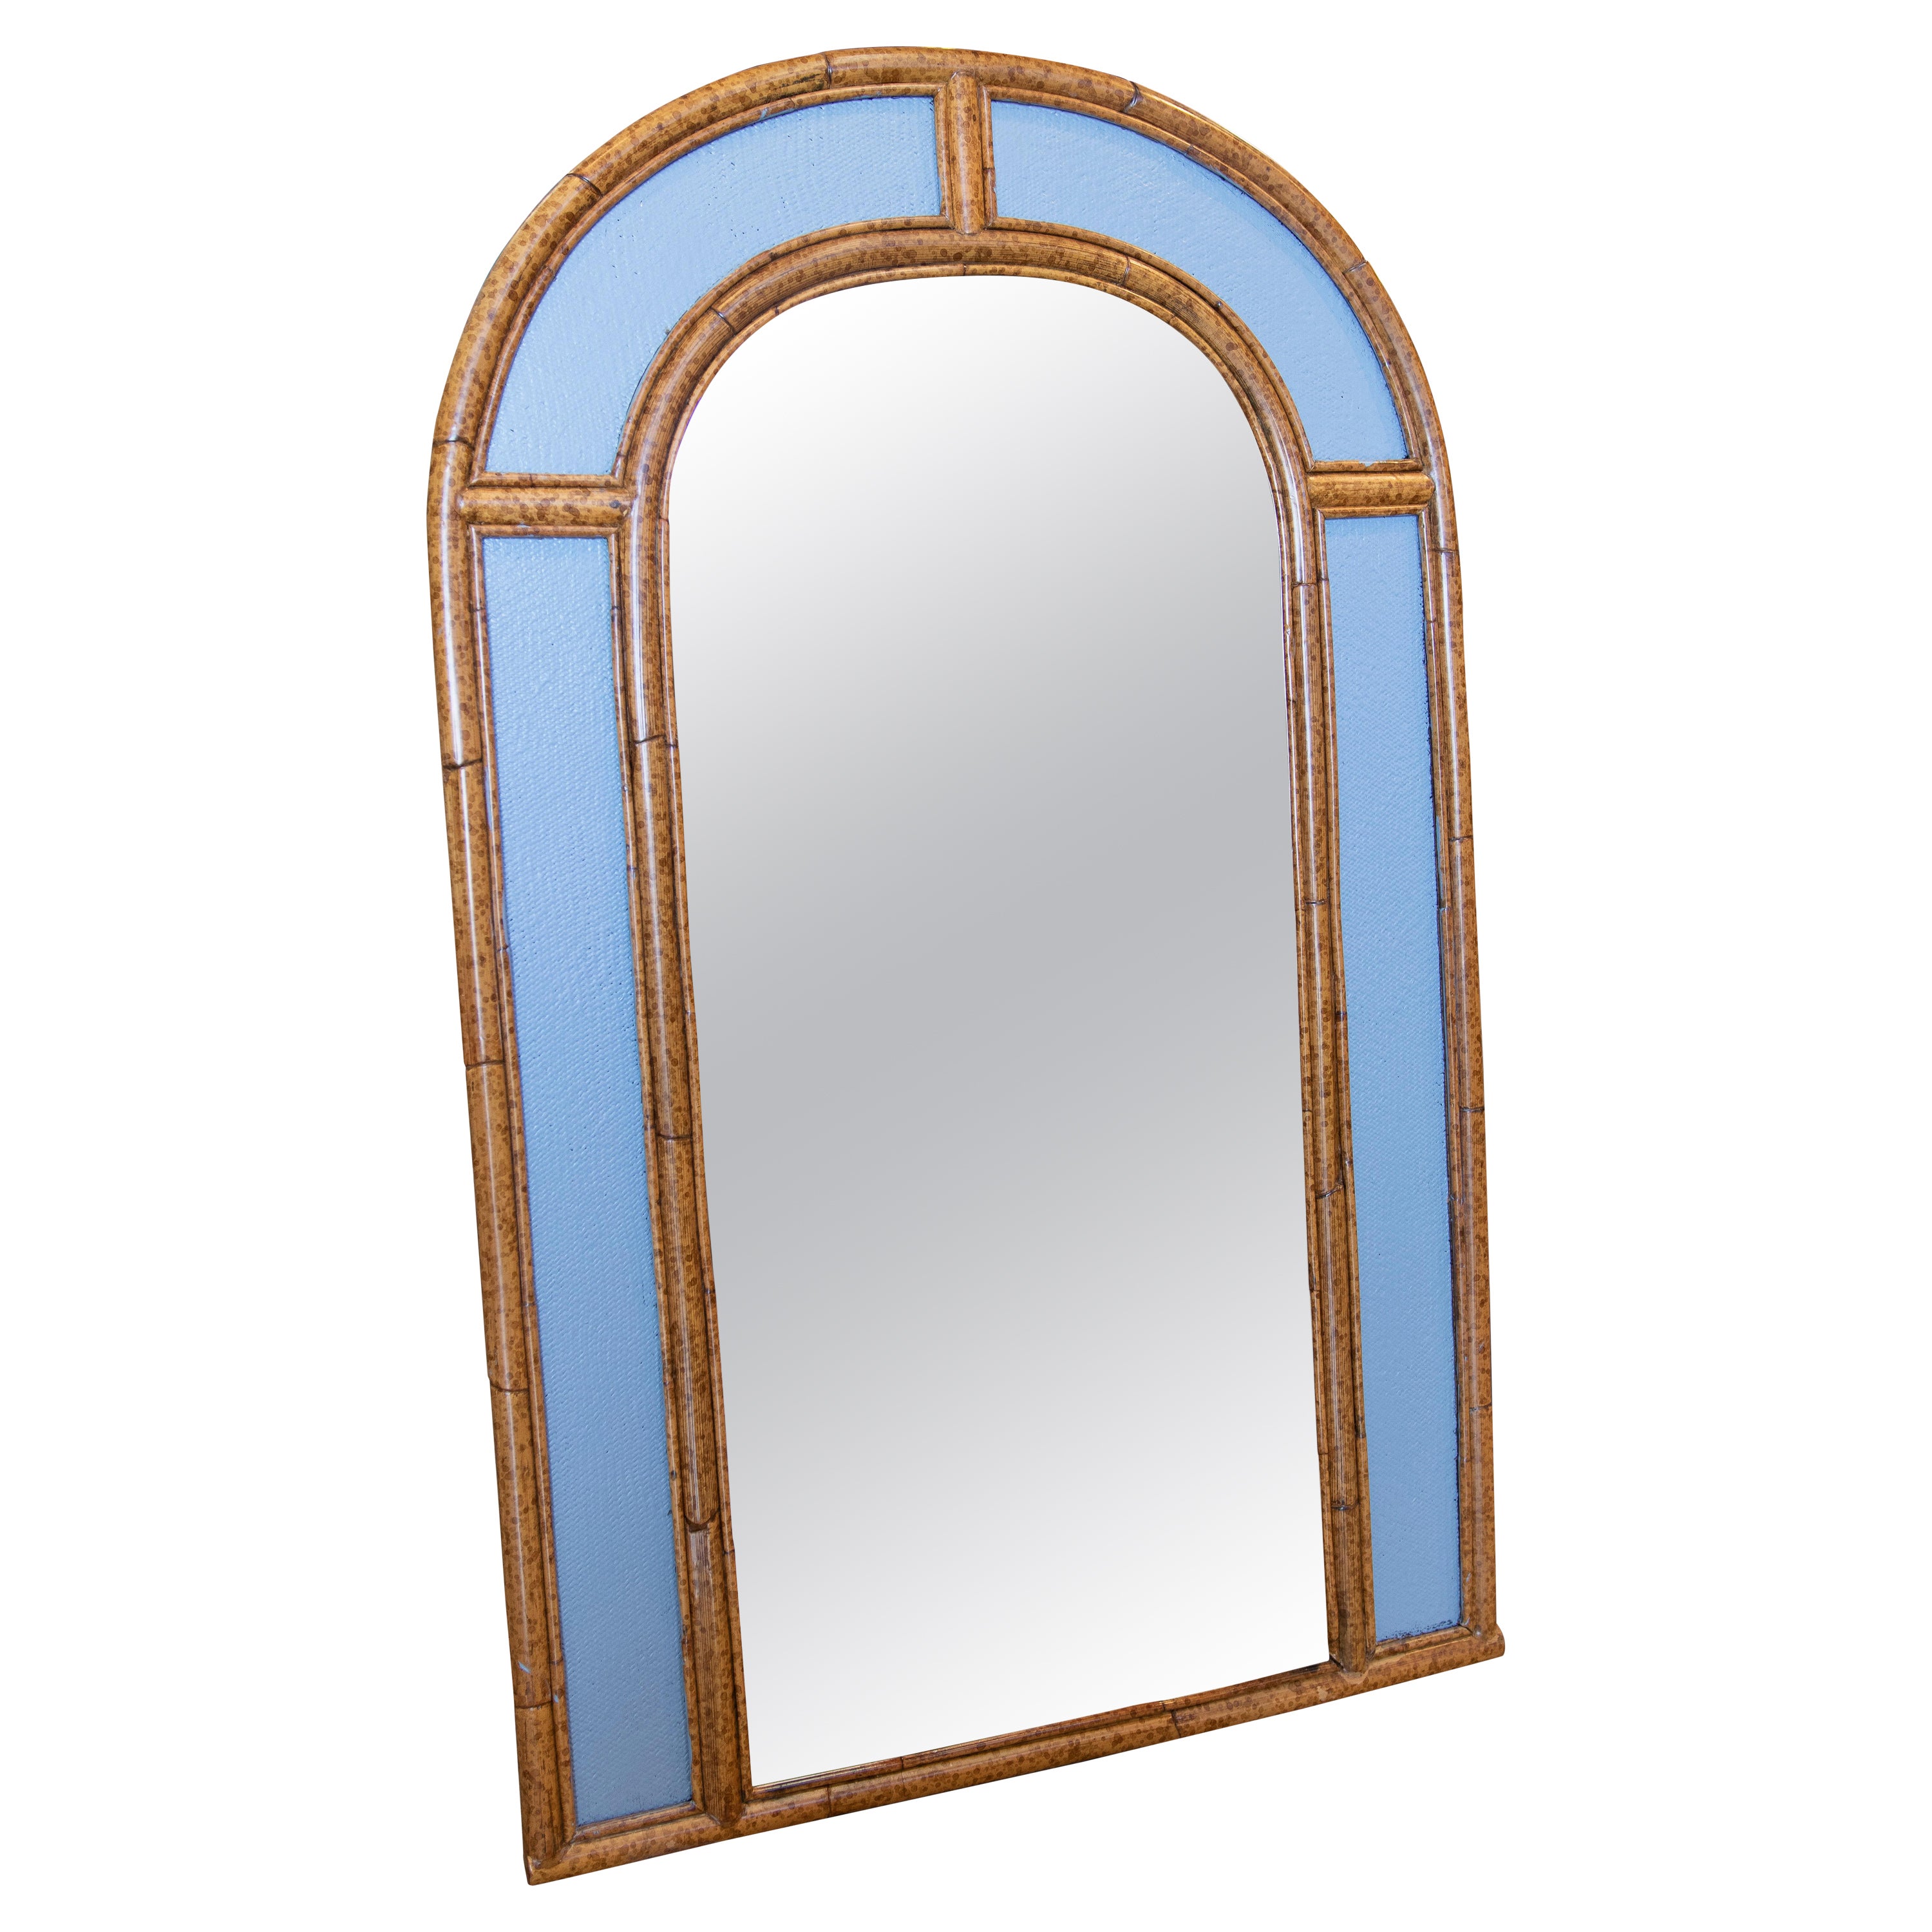 1980s Spanish Arched Bamboo & Cane Wall Mirror w/ Indigo Panels For Sale